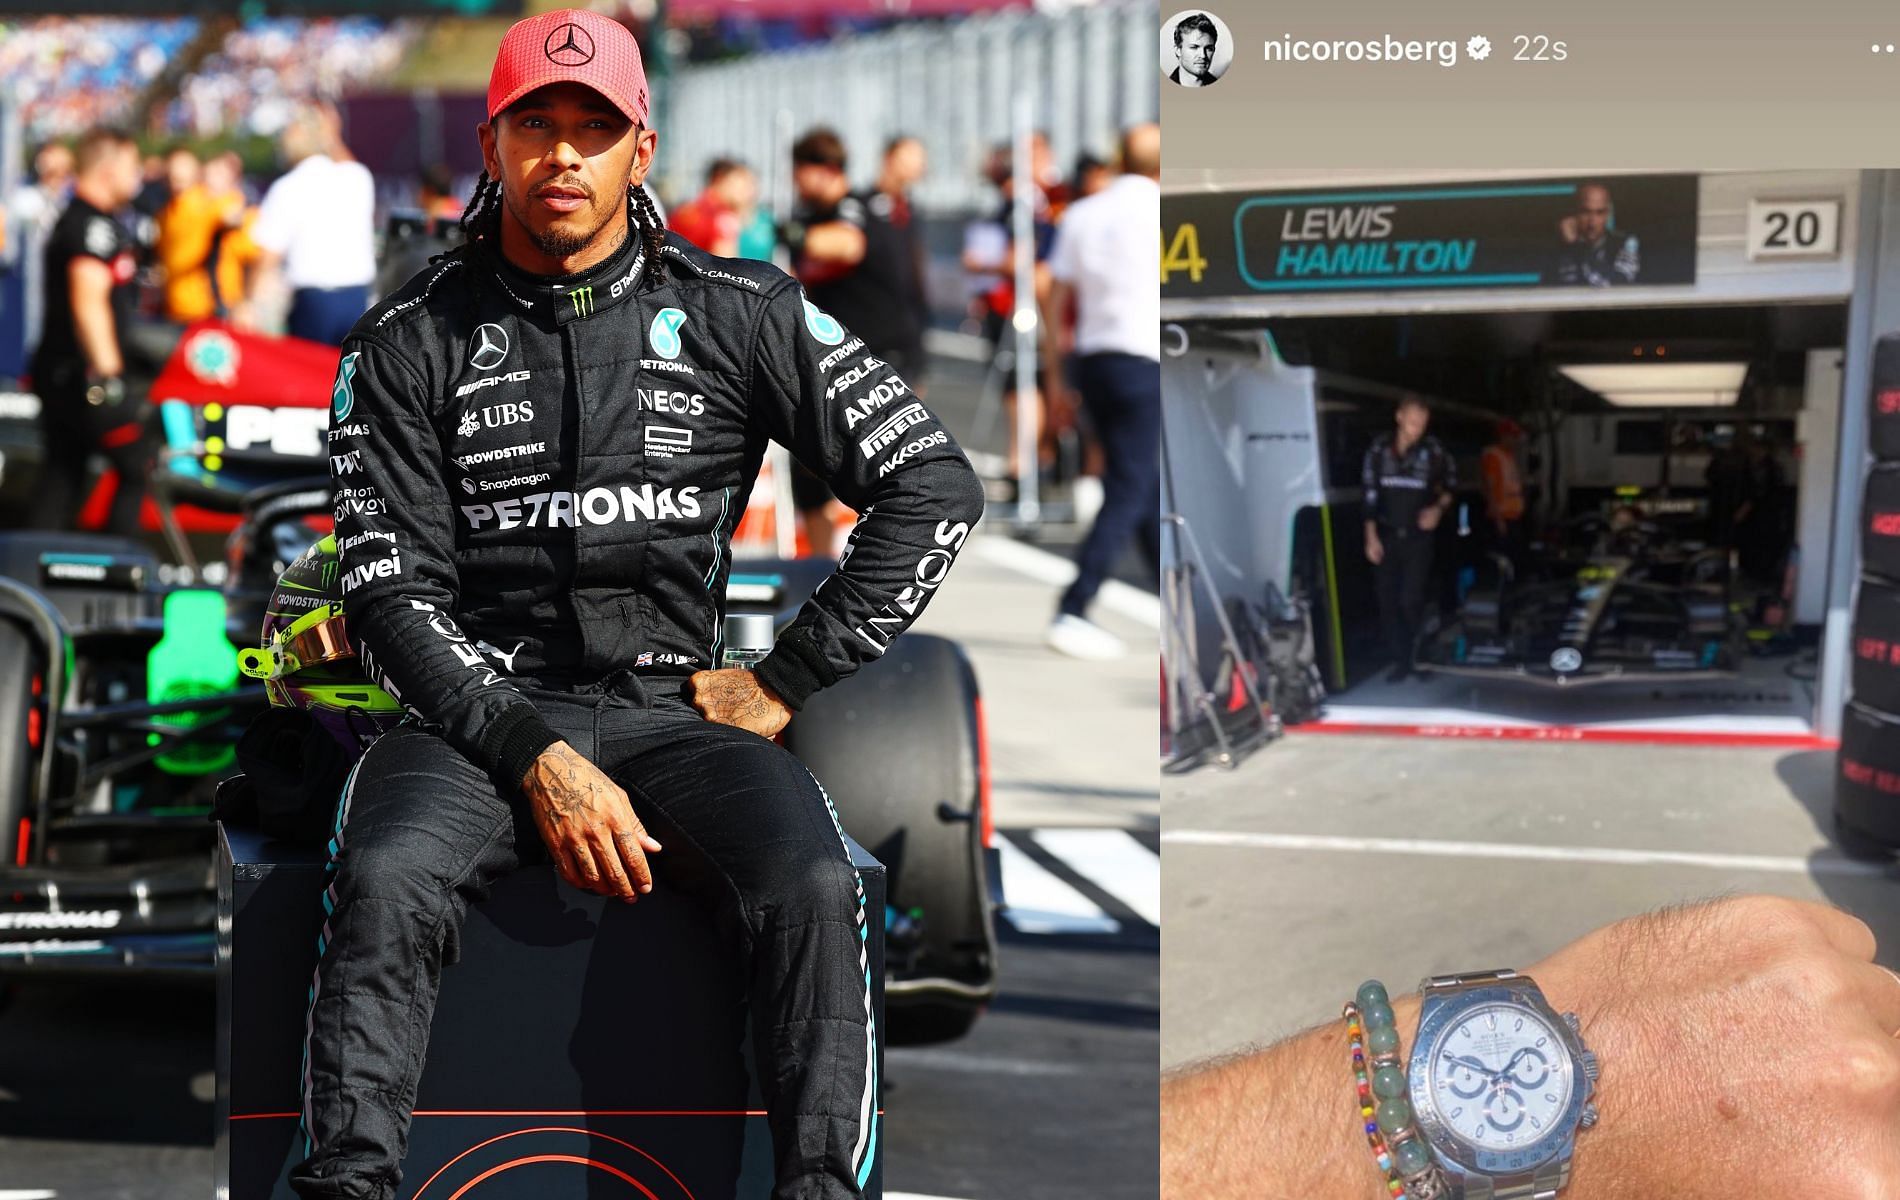 Lewis Hamilton and the infamous Nico Rosberg curse. Both pictures taken from Twitter. 